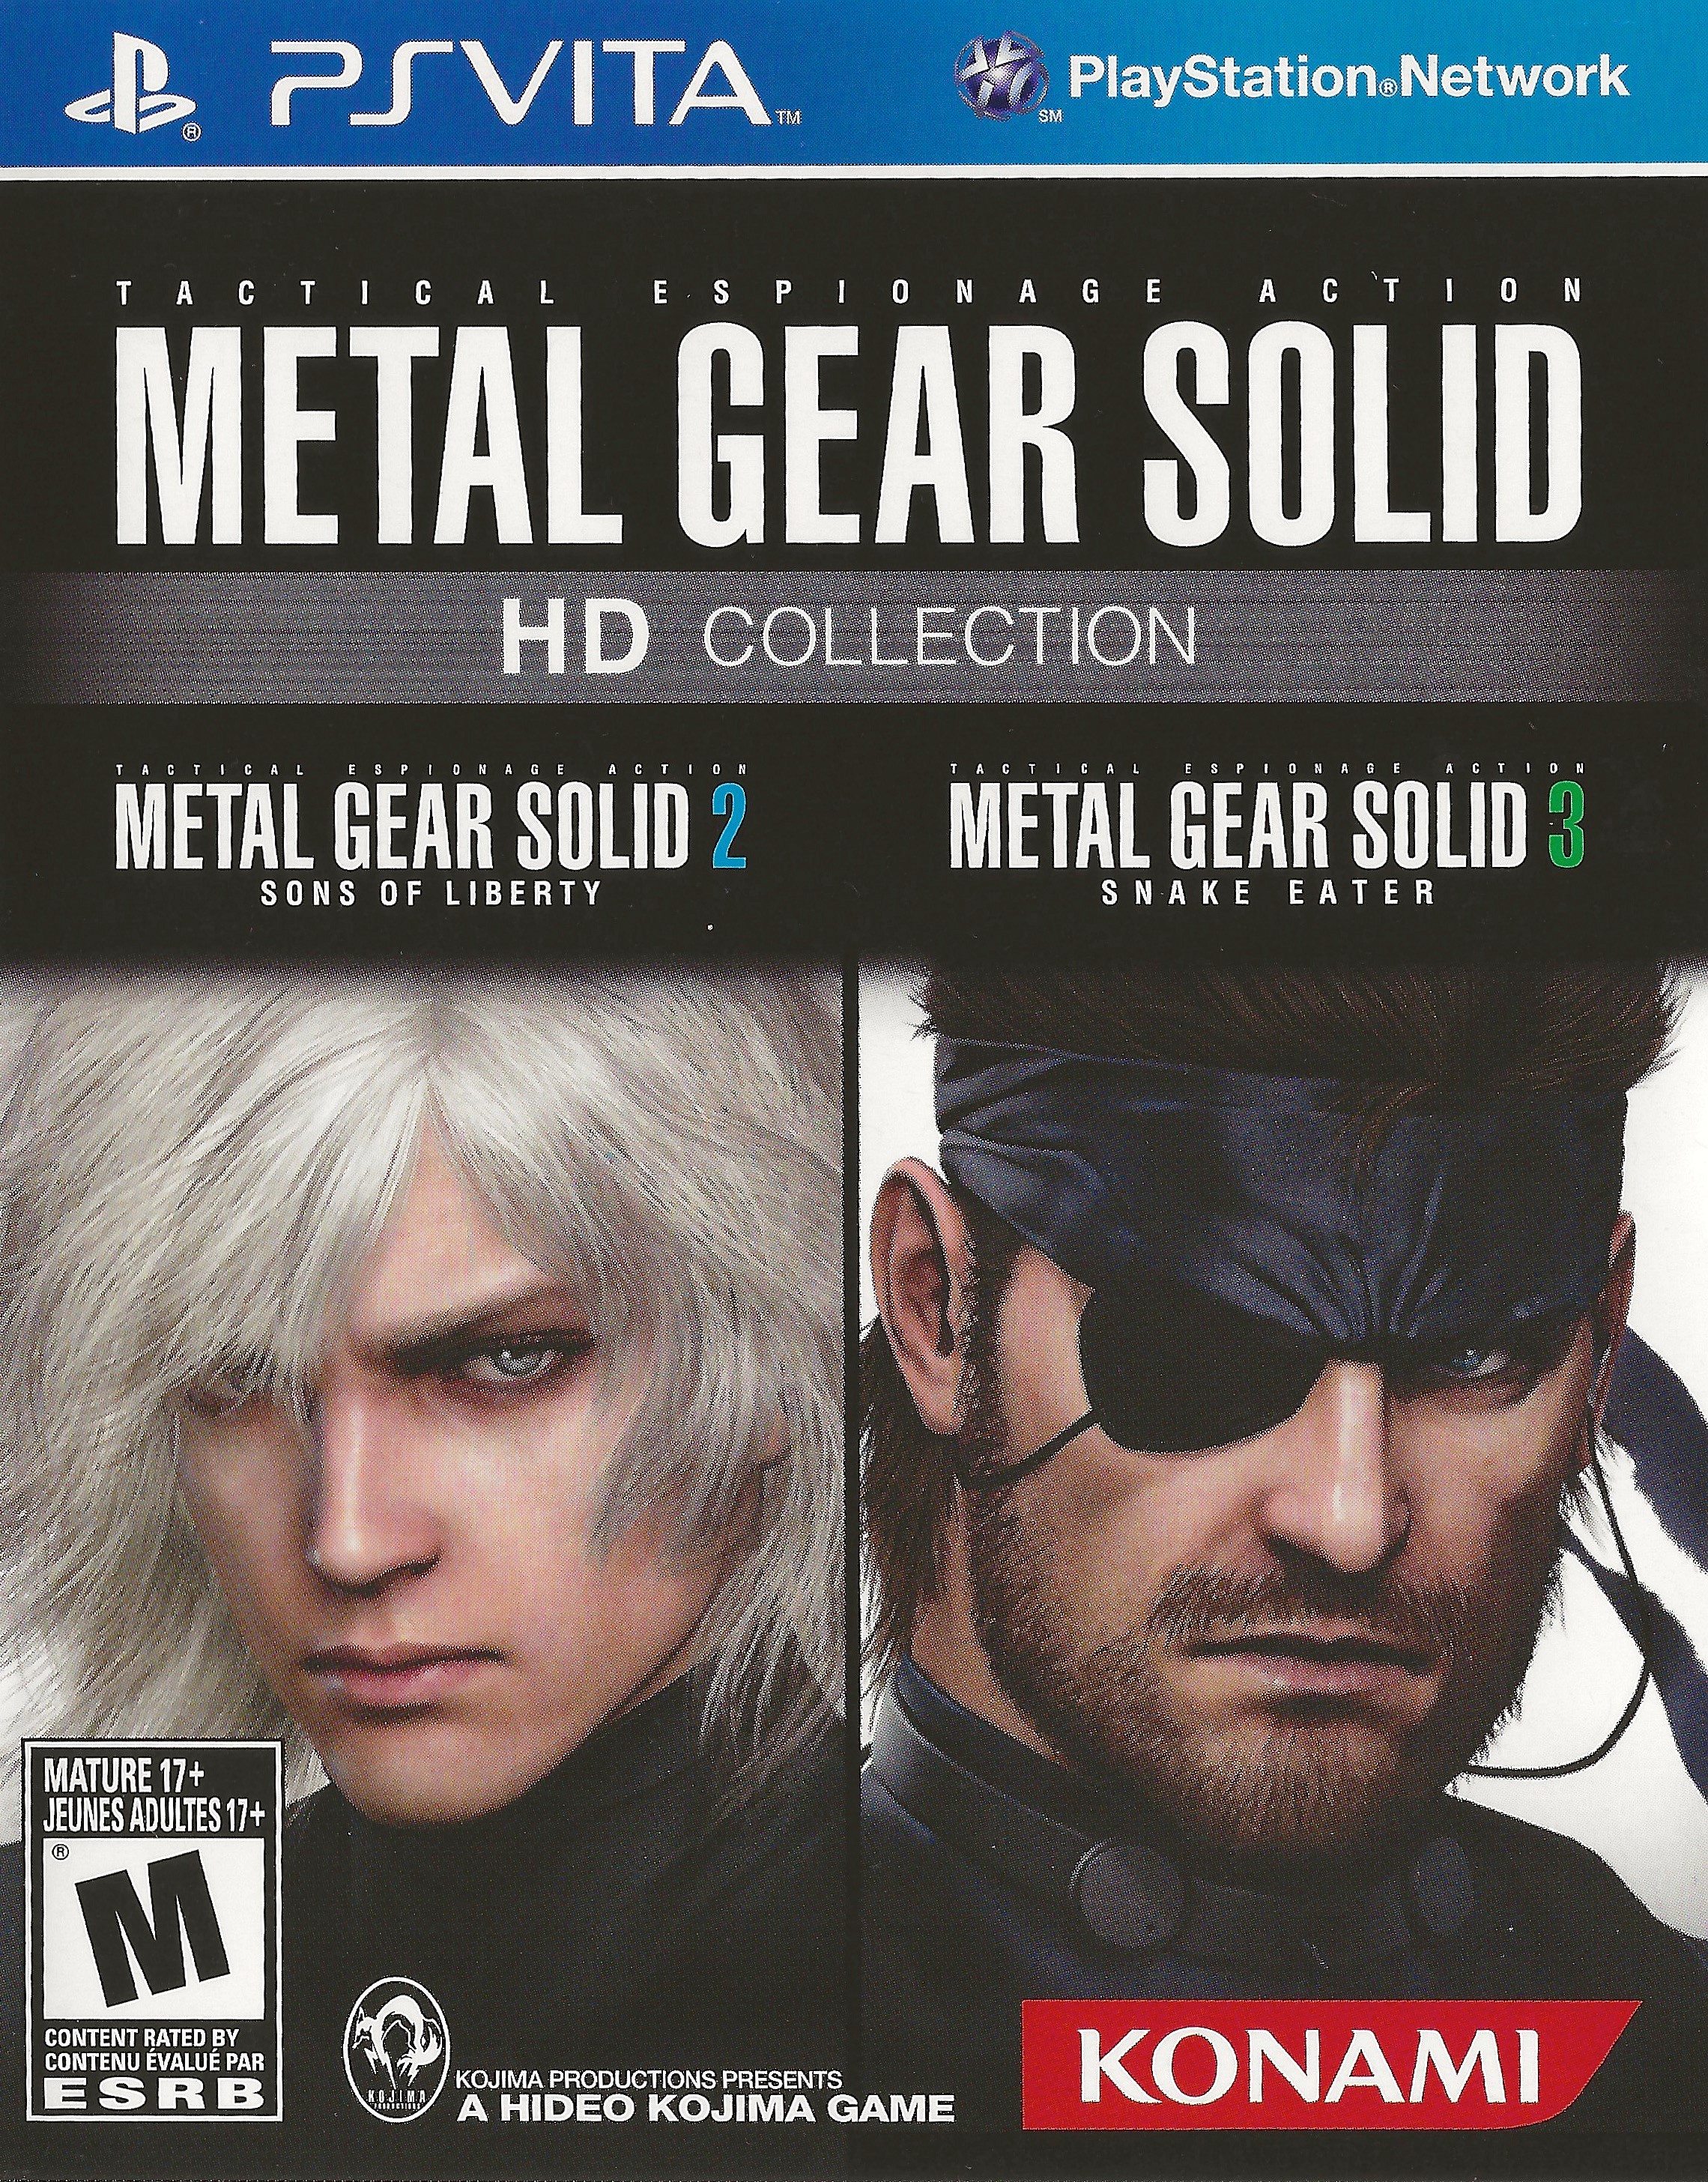 'Metal Gear Solid: HD Collection'